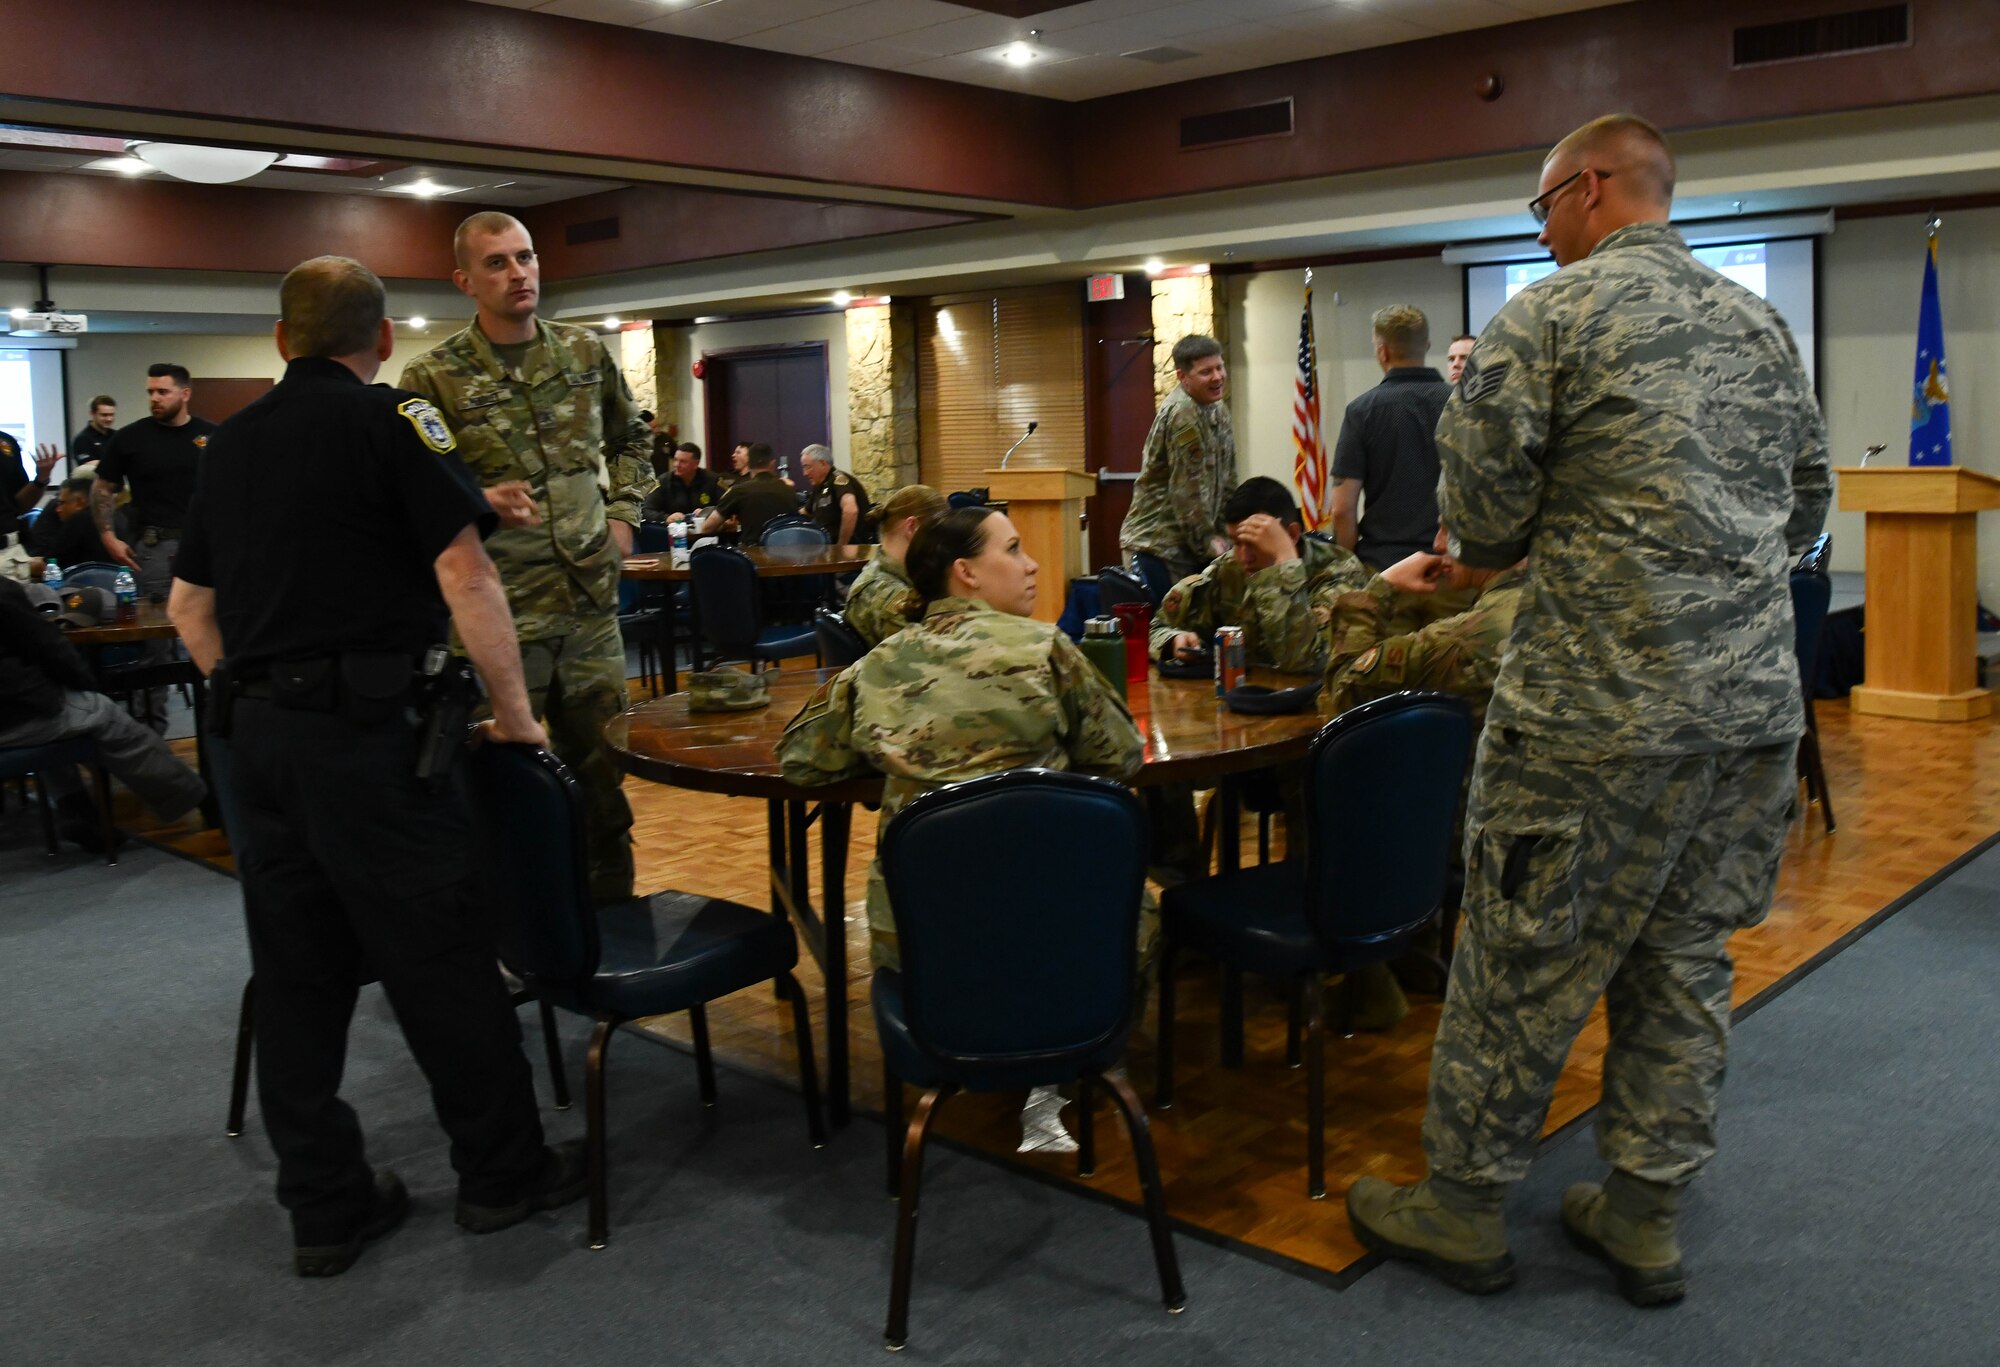 Law enforcement officers of Oklahoma socialize during a break in the bomb technician briefings, Mar. 29, 2019, at Altus Air Force Base, Okla. The training was designed to provide first responders with updated information on current threats.  (U.S. Air Force photo by Airman First Class Dallin Wrye)